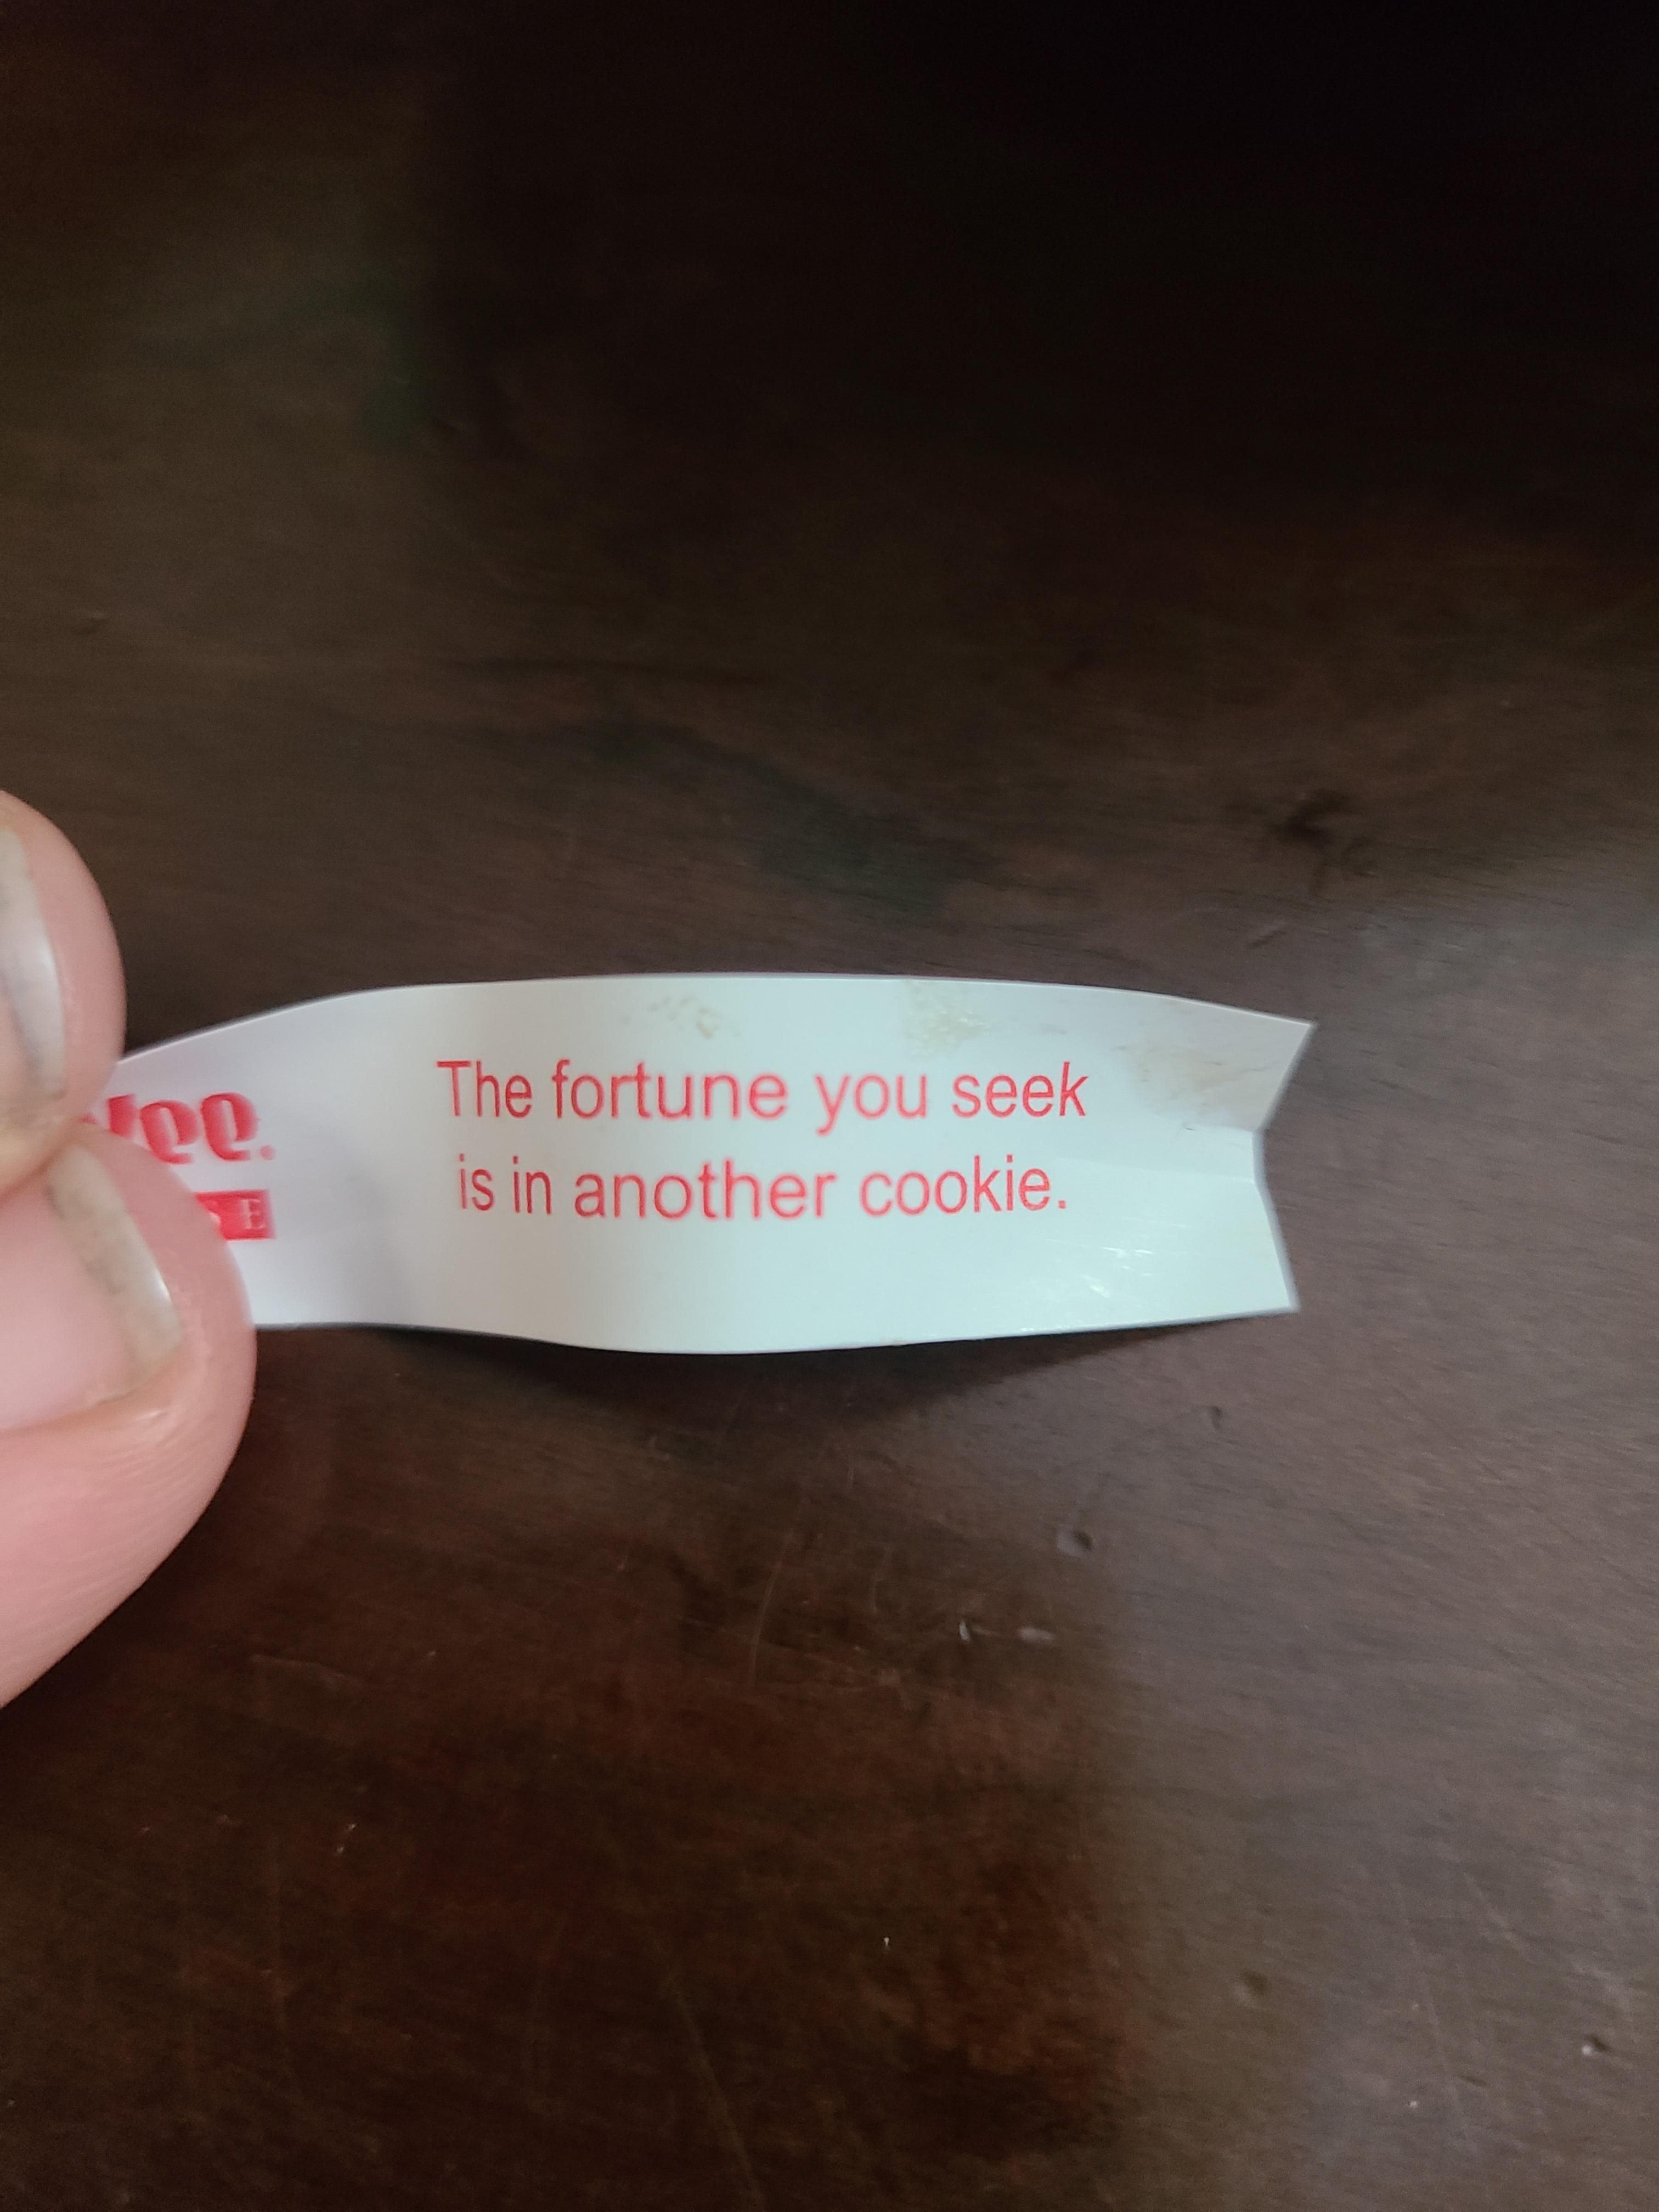 I got trolled by my fortune cookie. Also, our princess is in another castle.